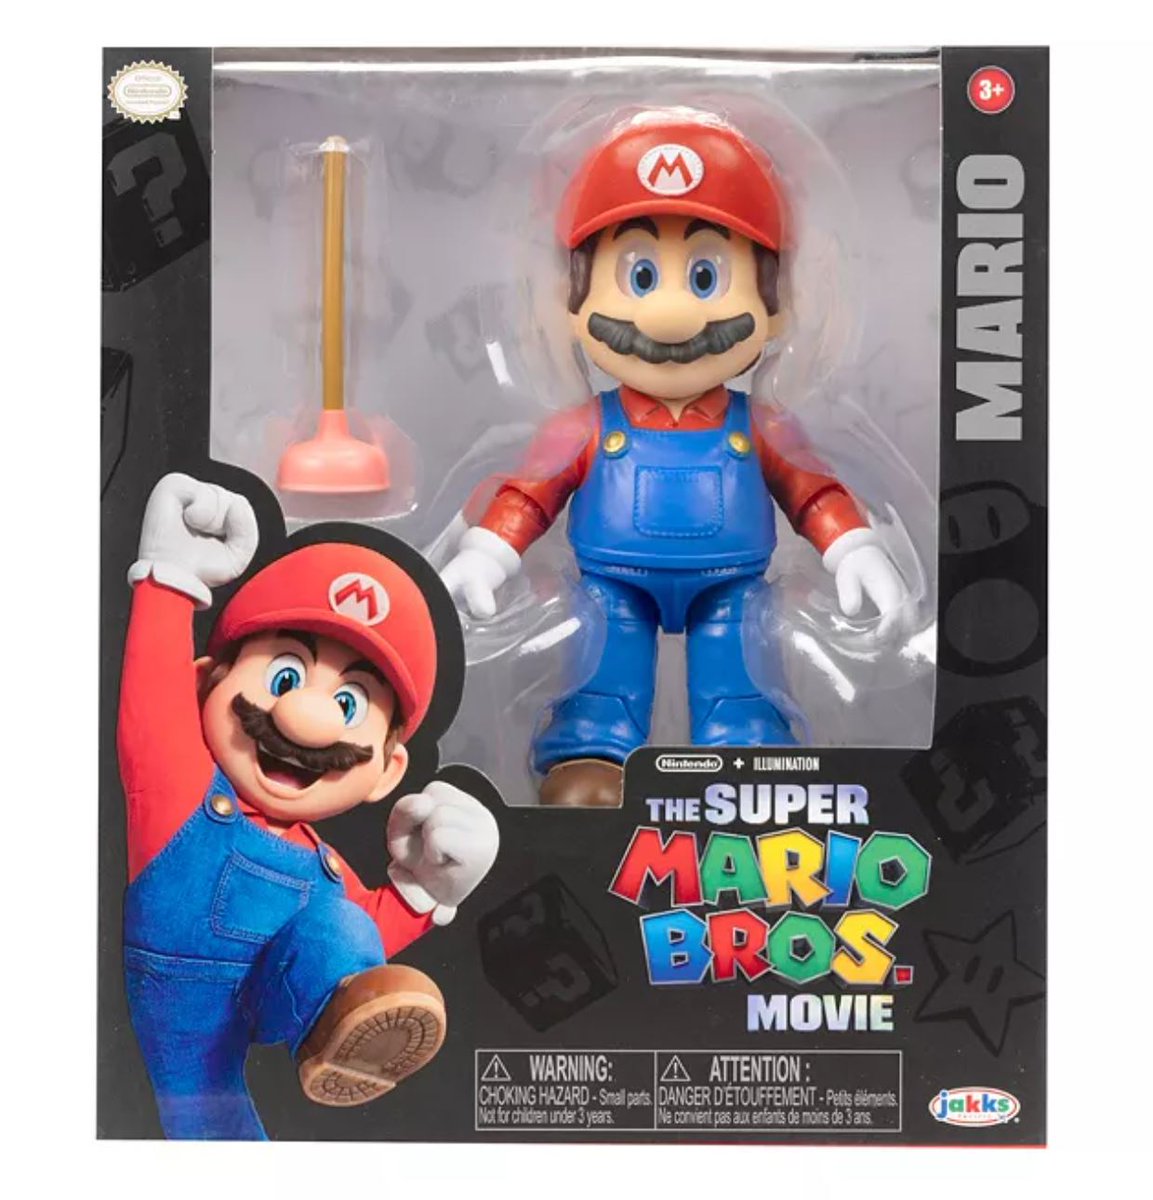 SUPER MARIO5' Mario Figure currently only $14.99 at Macys #ad #SuperMarioMovie #SuperMarioBrosMovie #SuperMarioBros #supermario 
bit.ly/41obpgj